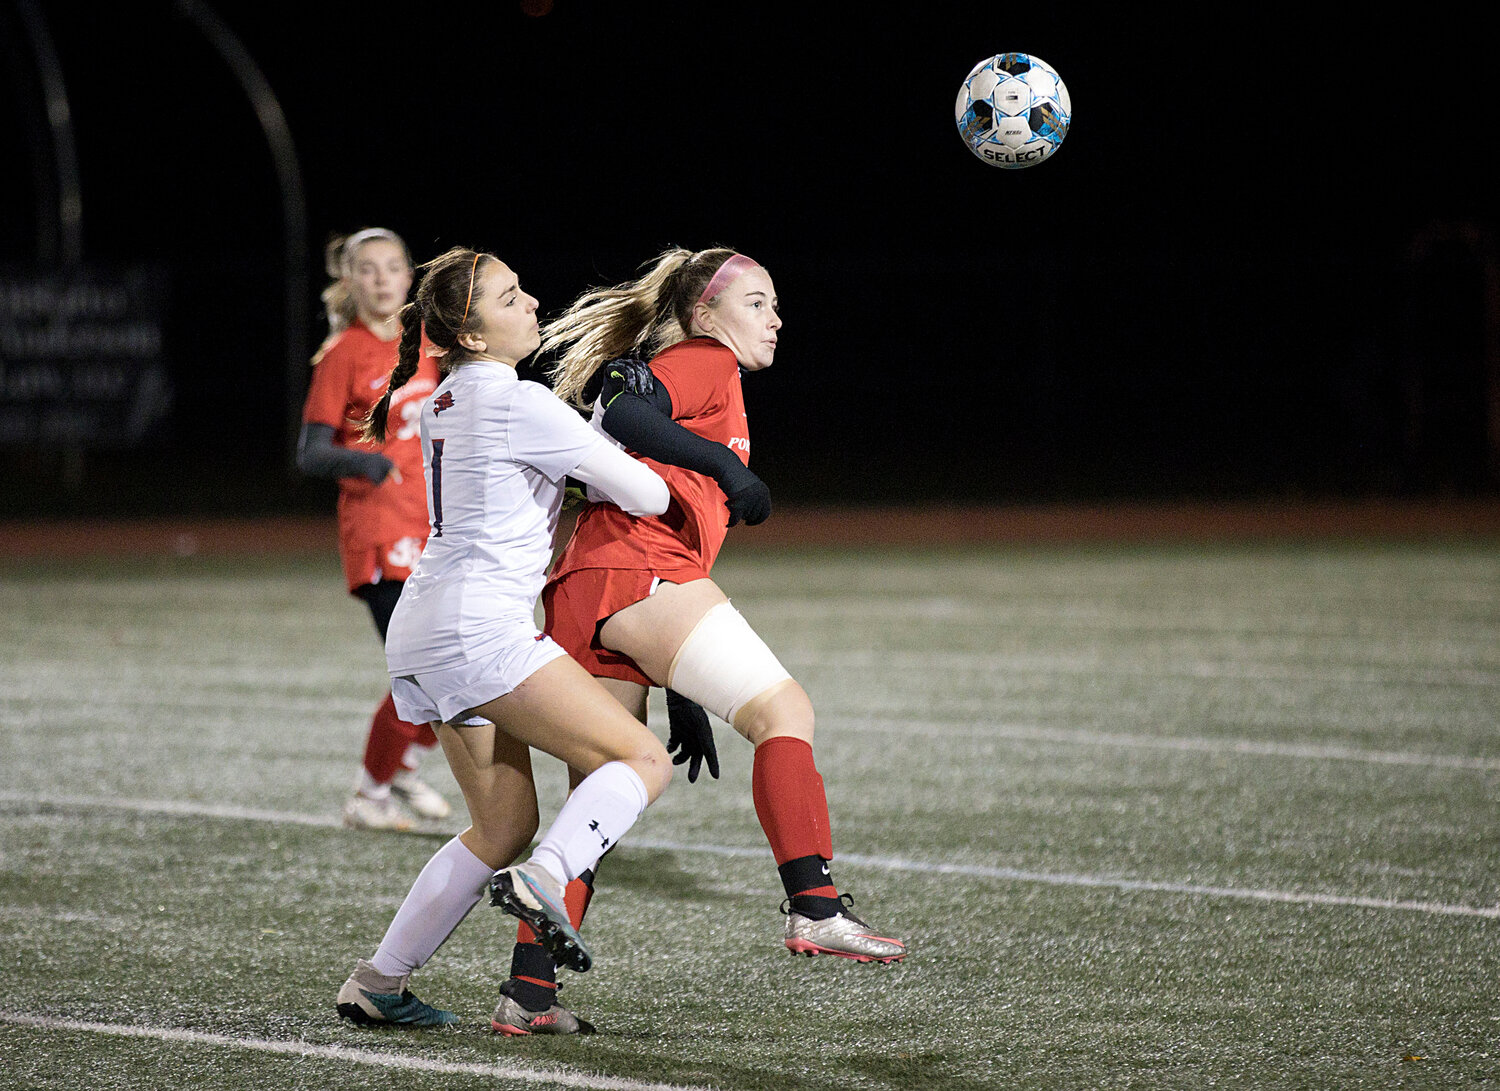 Lily Ferreira is pressured closely from behind while heading a pass toward a teammate.